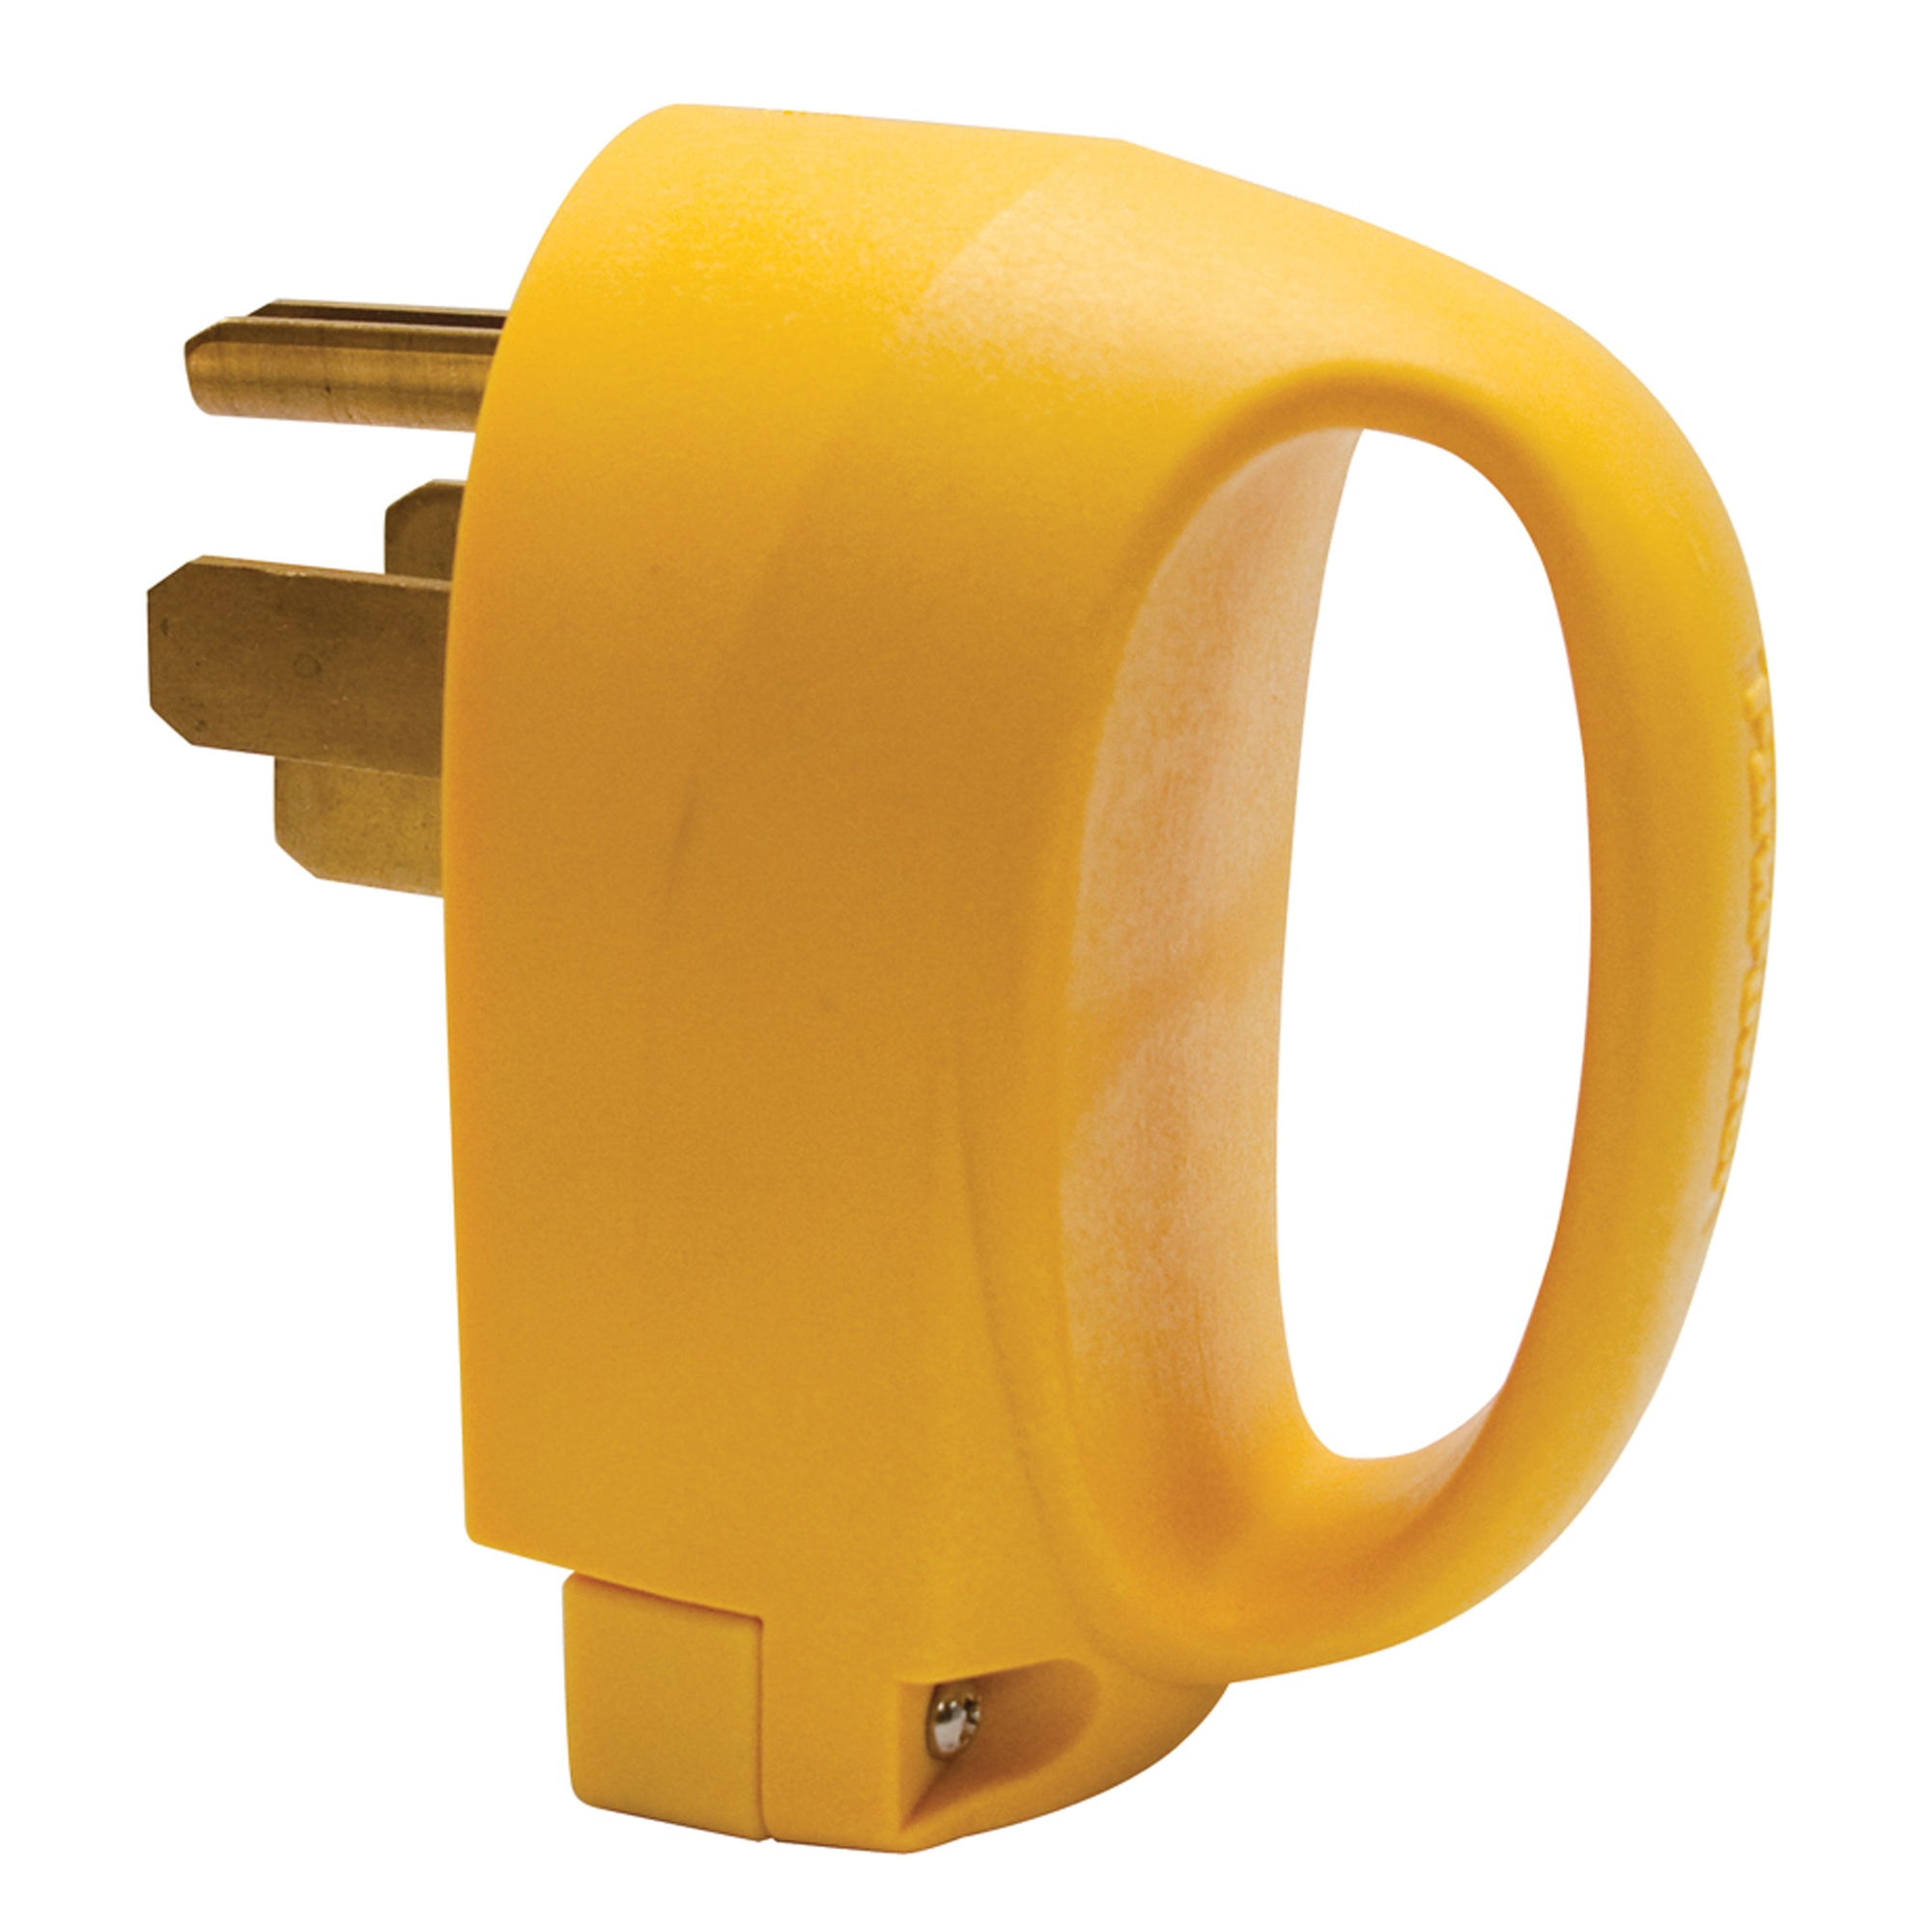 ParkPower 50MPRV Male Replacement Plug With Handle - 50 Amp